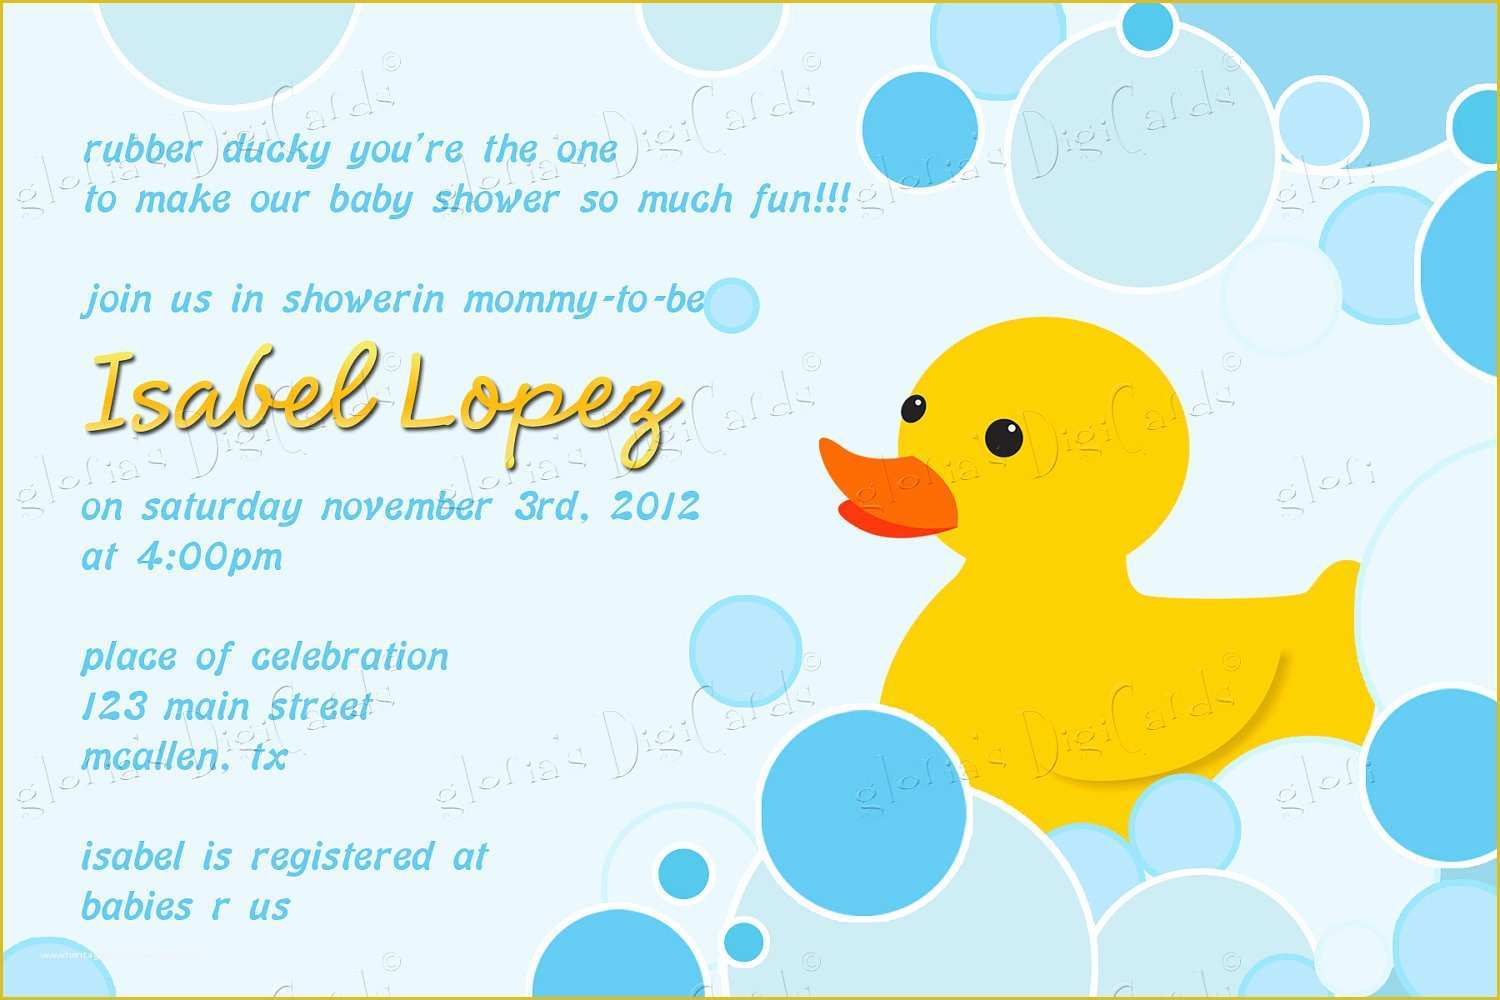 Free Rubber Ducky Baby Shower Invitations Template Of Rubber Ducky Baby Shower Invitation by Gloria S Digi Cards